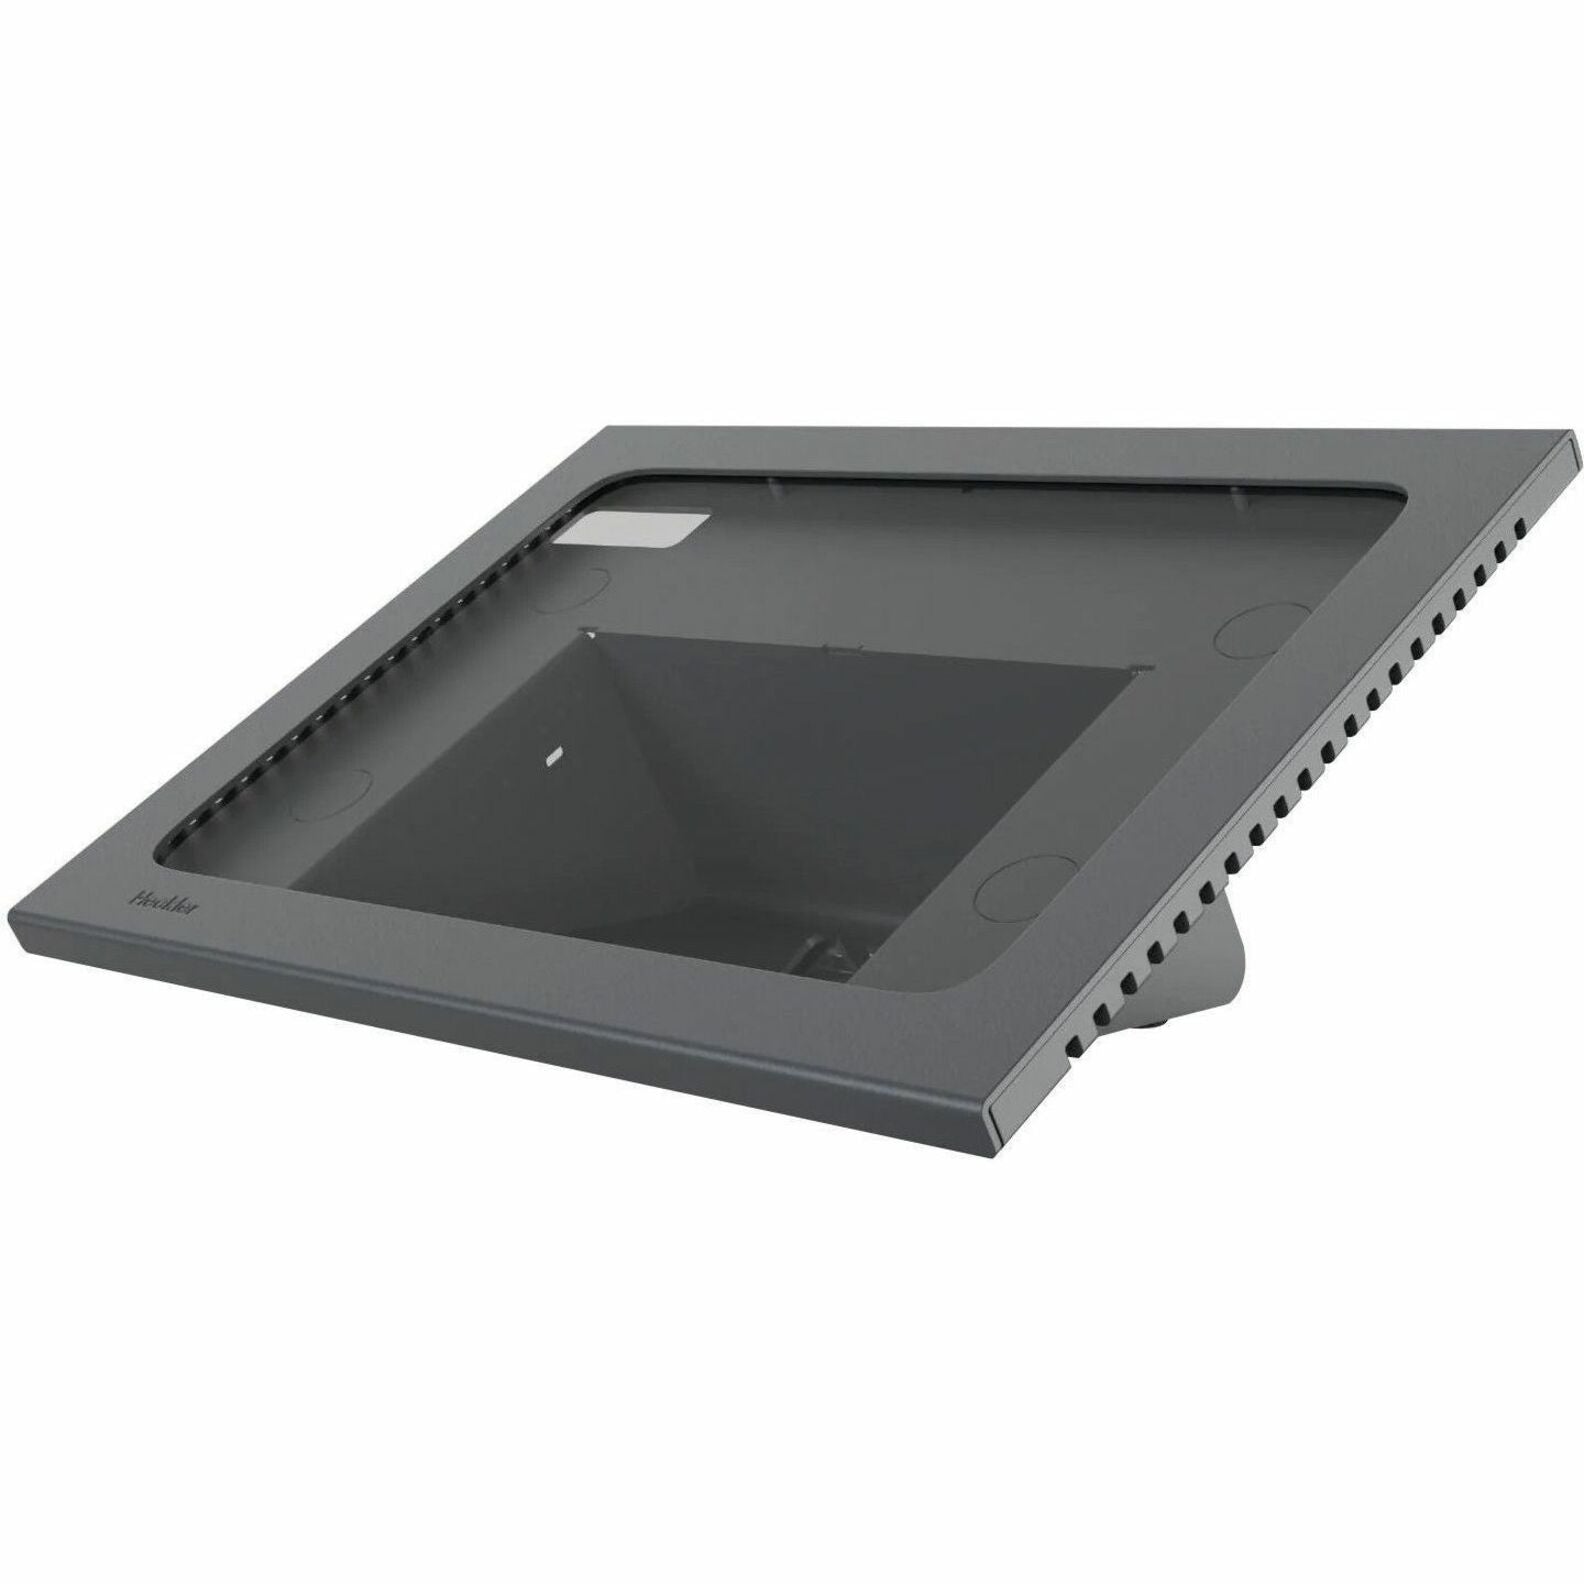 Heckler Design H751-BG Zoom Rooms Console for iPad 10th Generation, Scratch Resistant, Fingerprint Resistant, Theft Resistant, Durable, Tamper Resistant, Kensington Security Slot, Storage Compartment